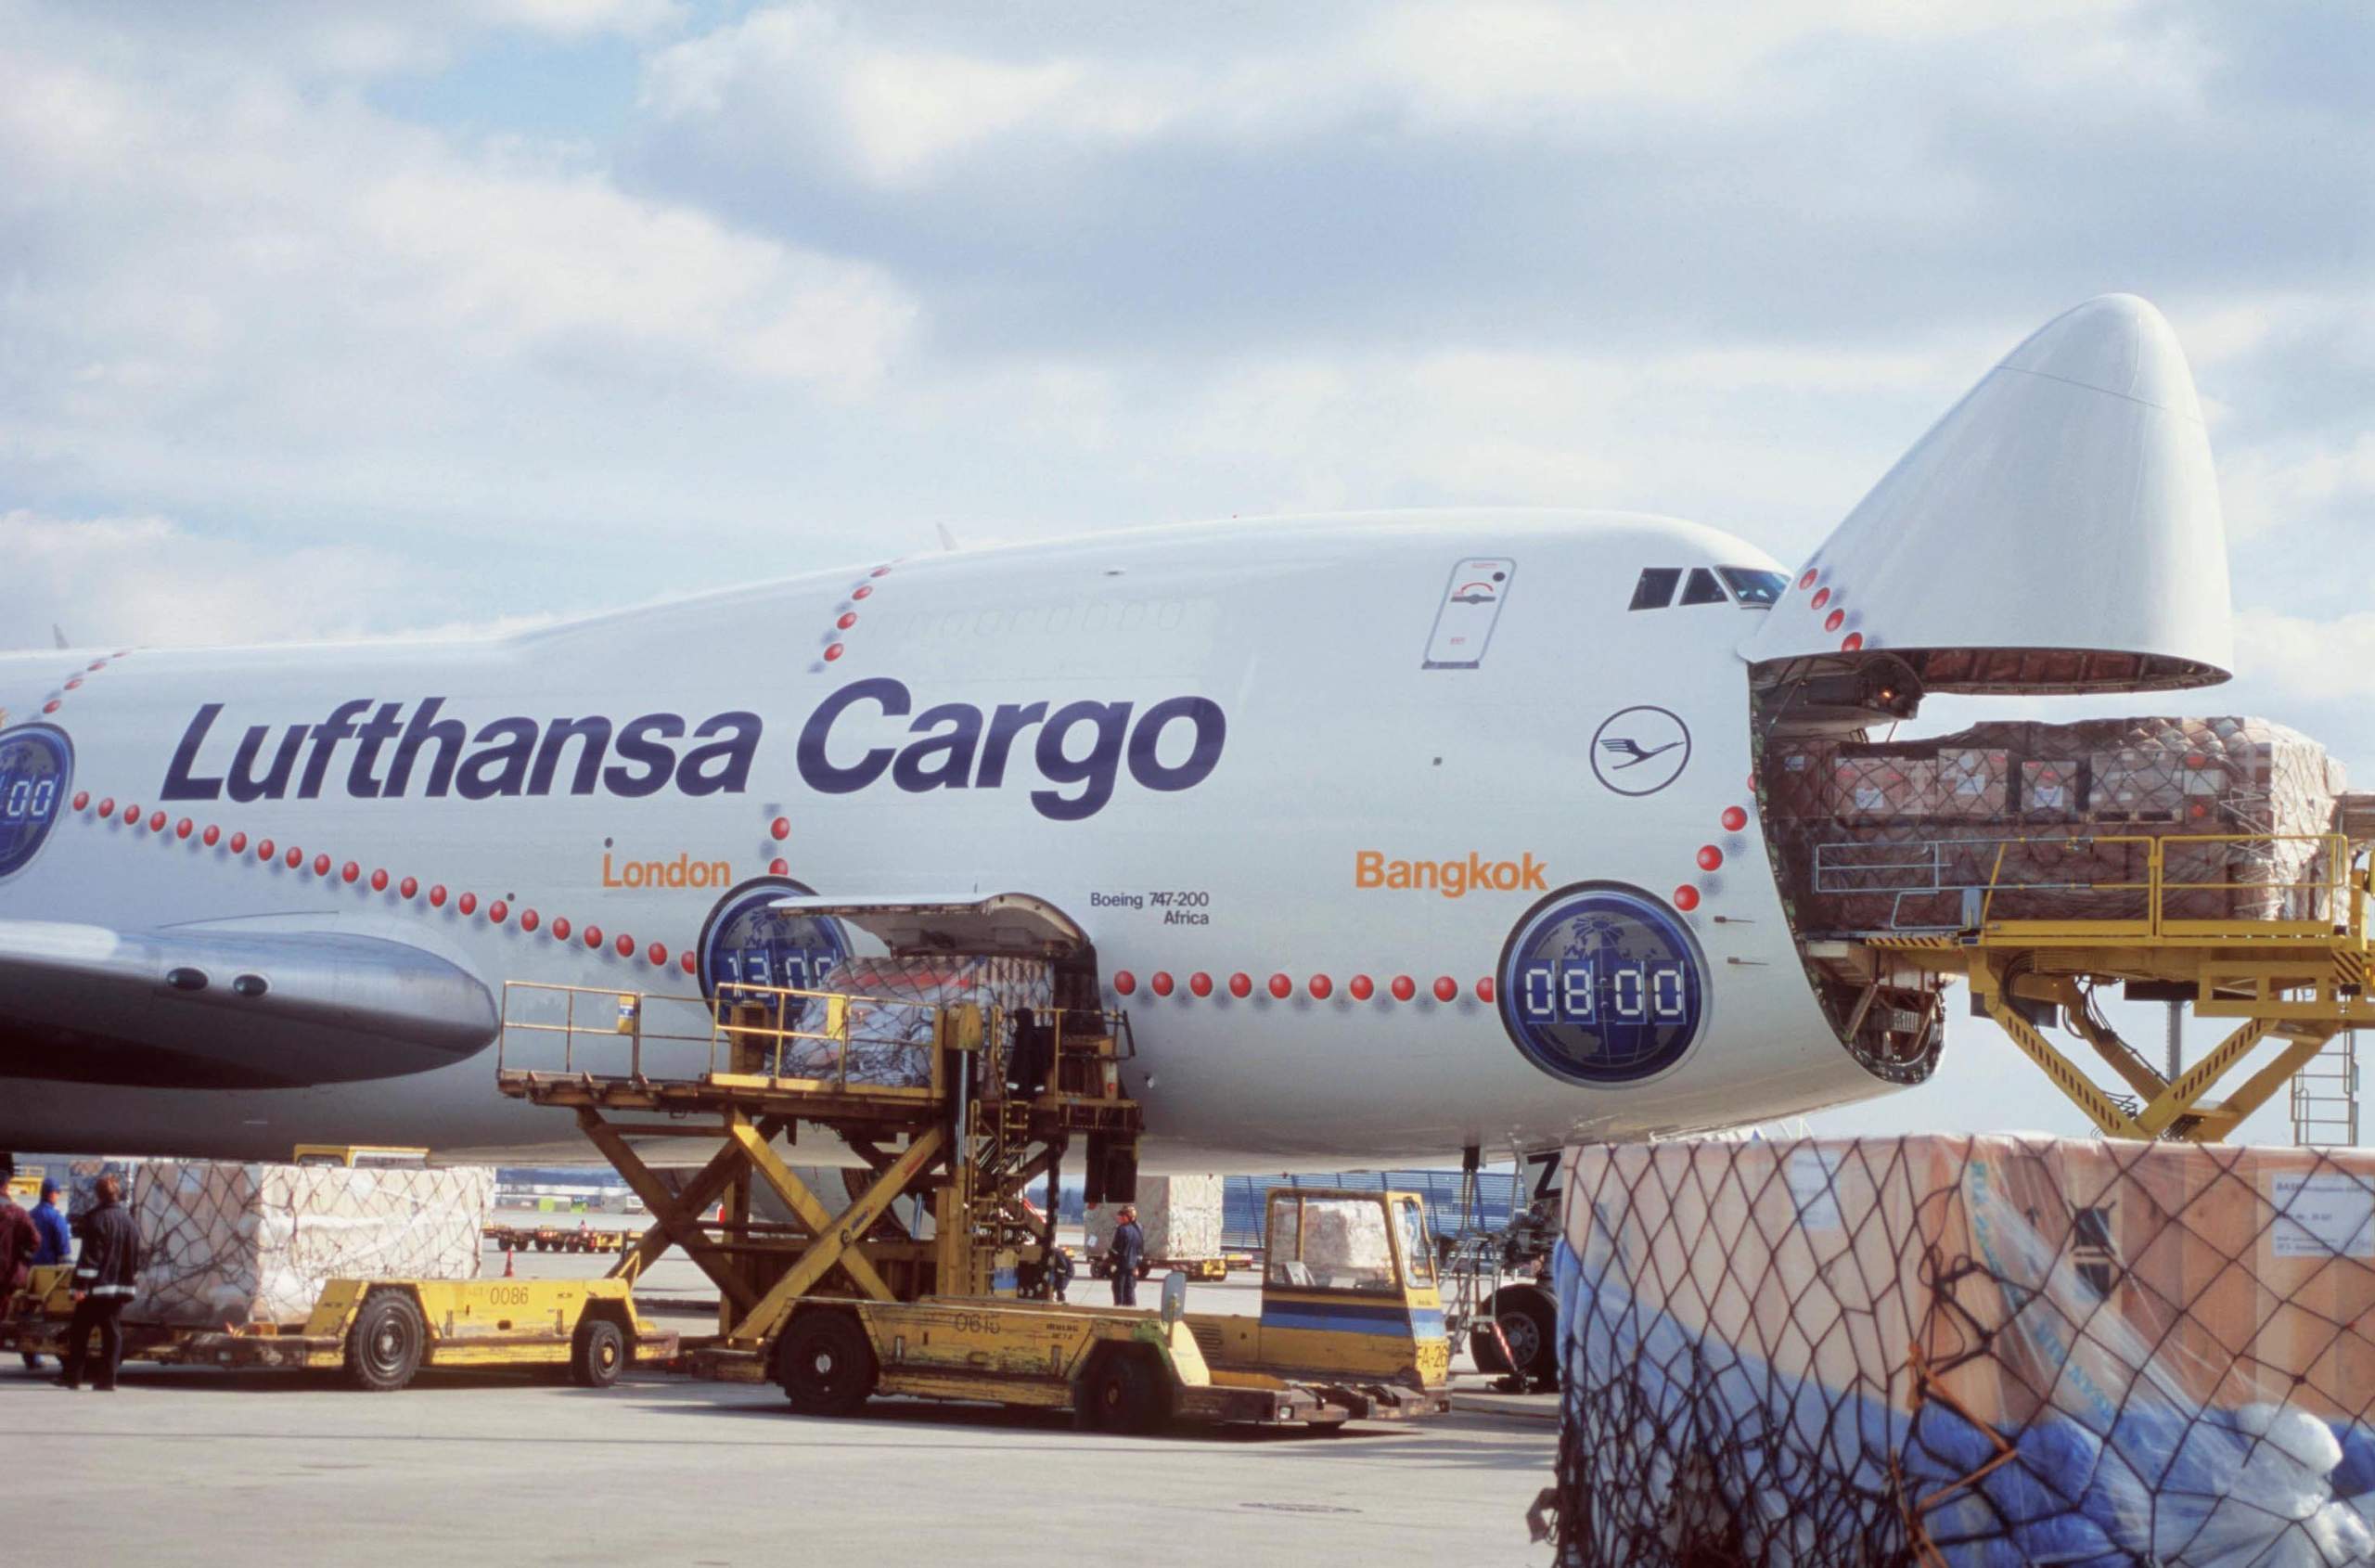 Moving to AIFA would double costs and be inefficient: Lufthansa Cargo